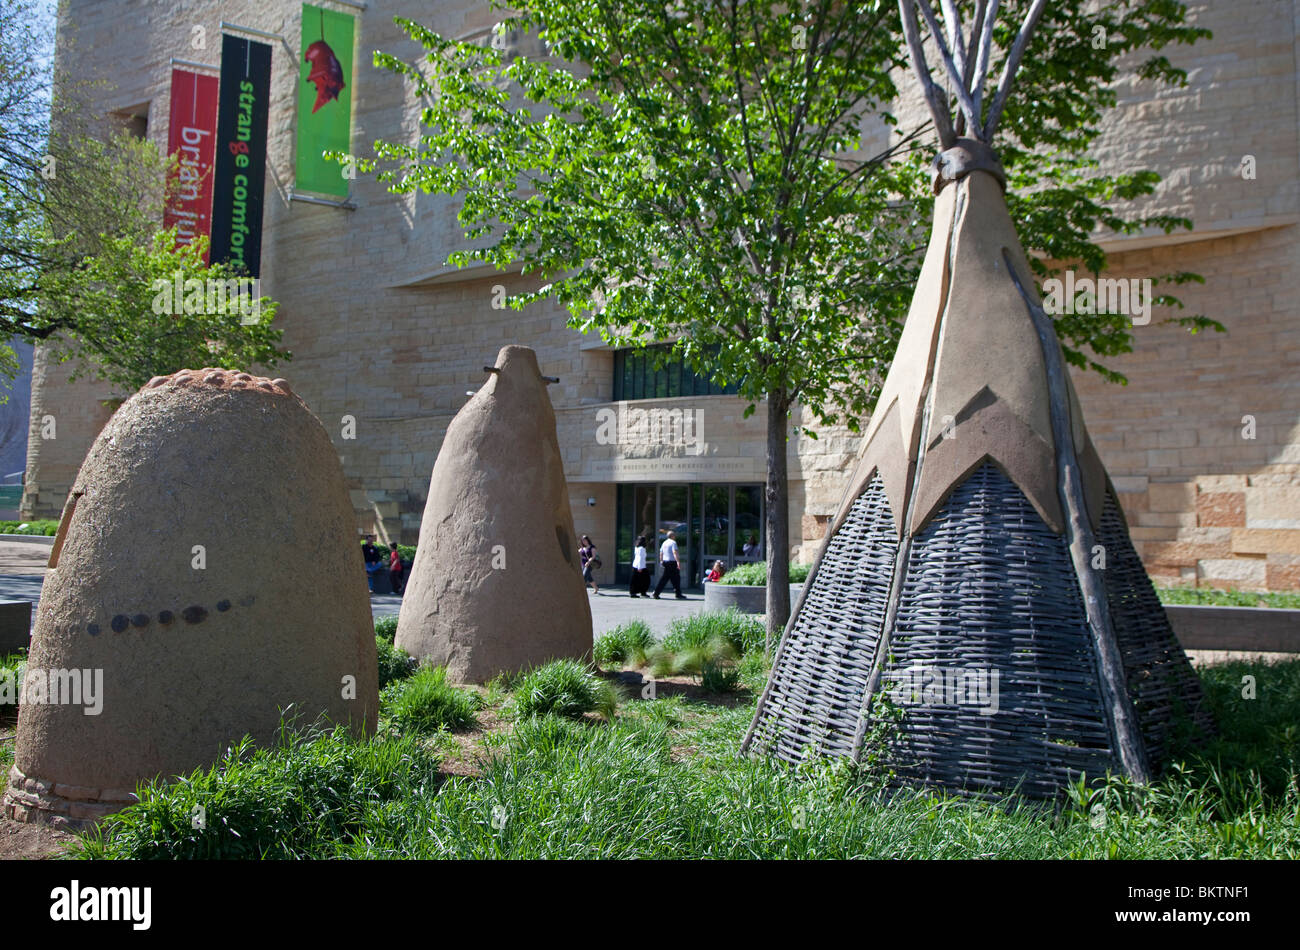 Washington, DC - The National Museum of the American Indian. Stock Photo